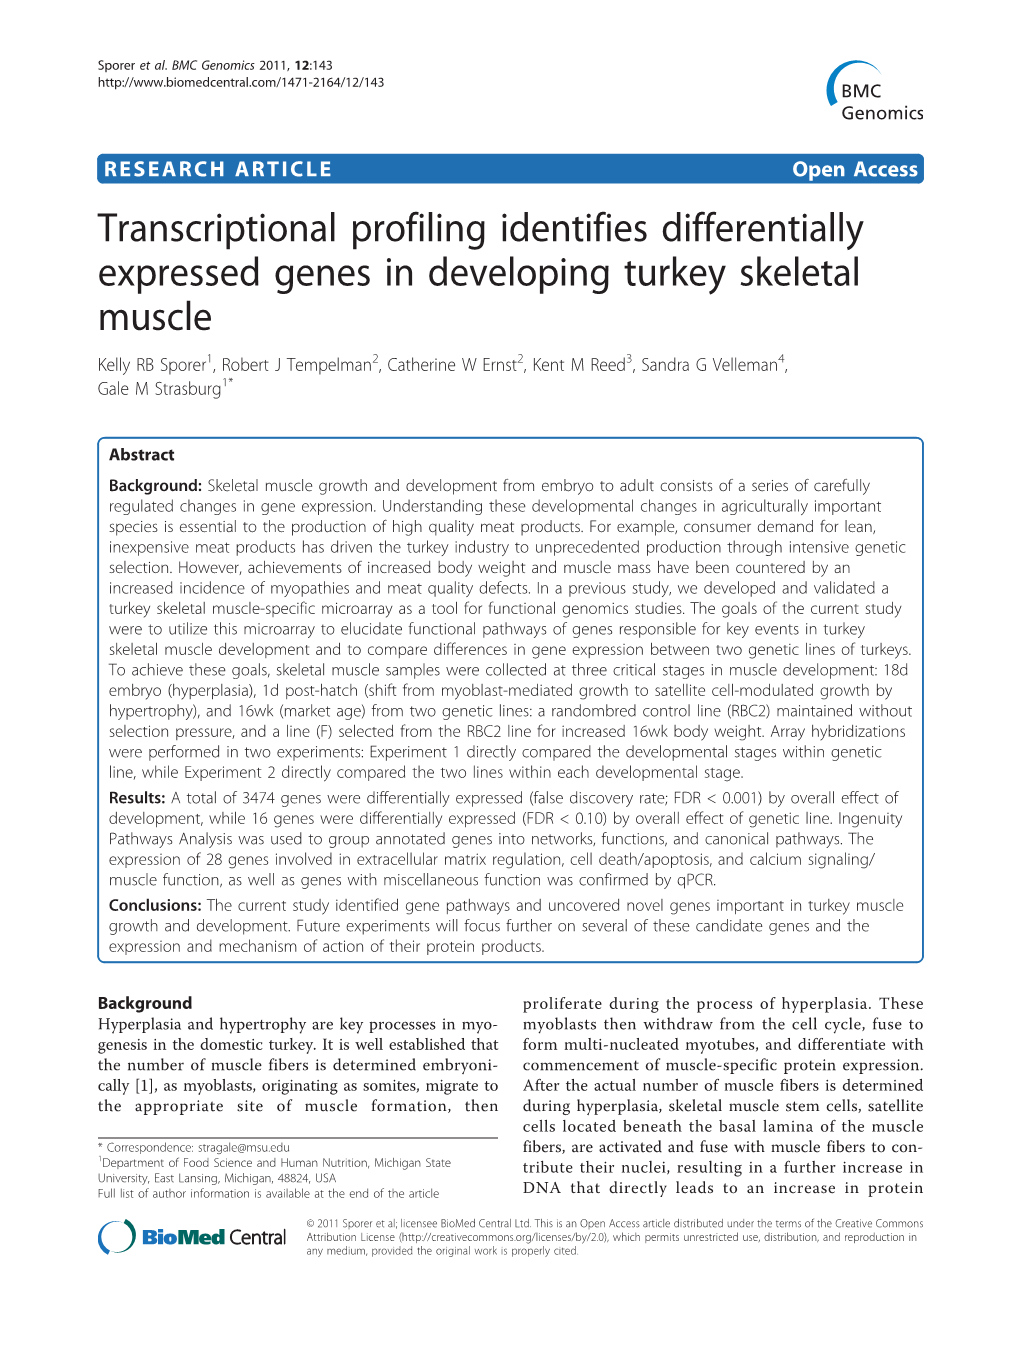 Transcriptional Profiling Identifies Differentially Expressed Genes In